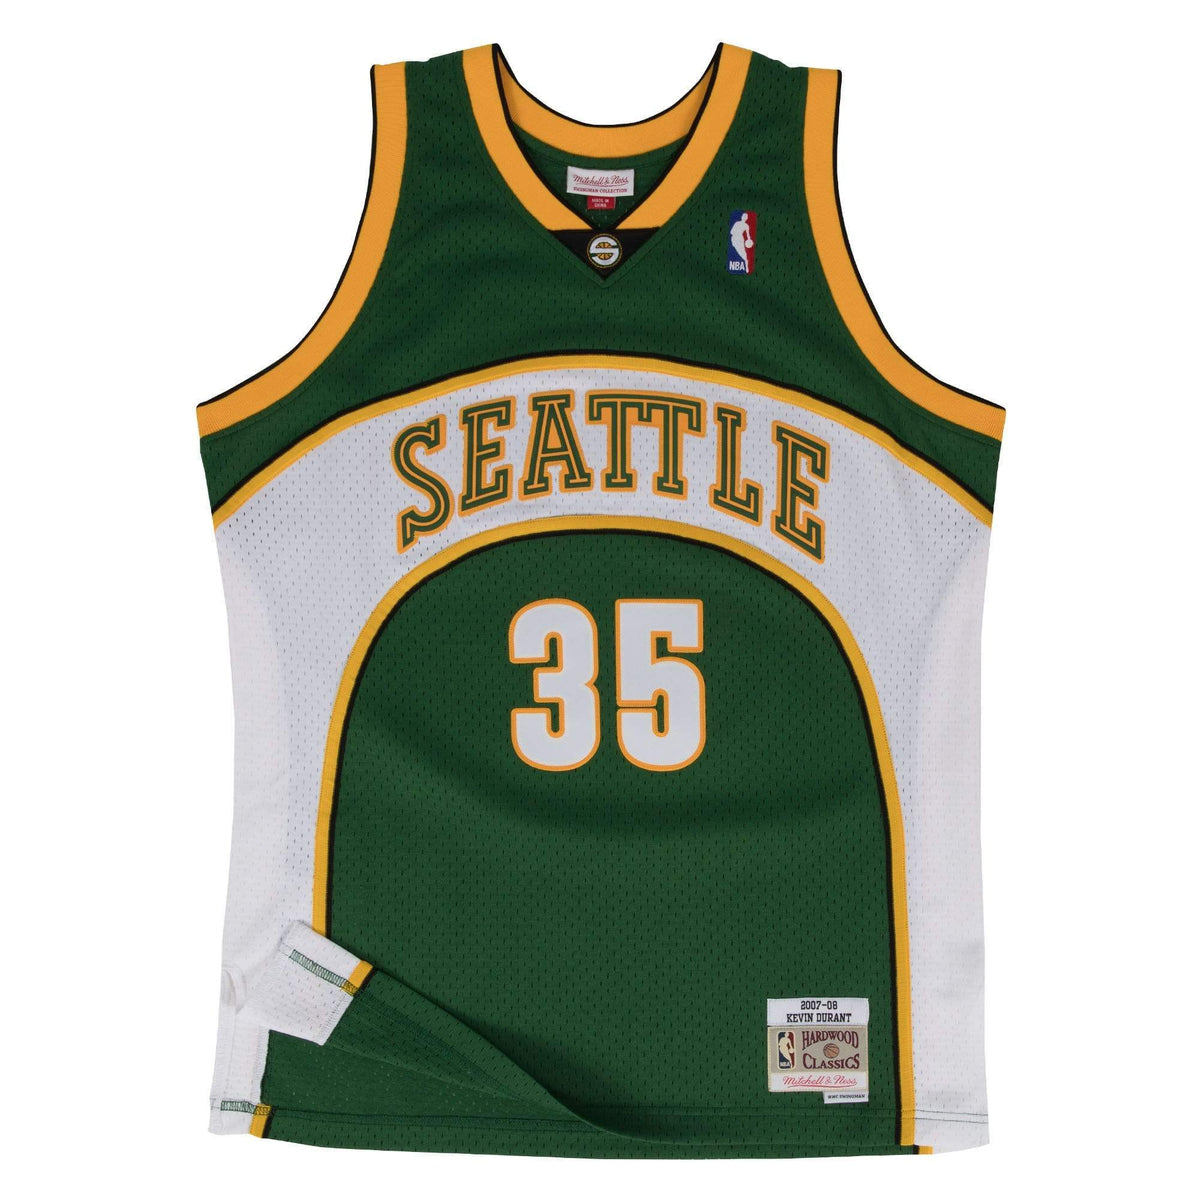 Custom College Basketball Jerseys Colorado State Rams Jersey Name and Number Green